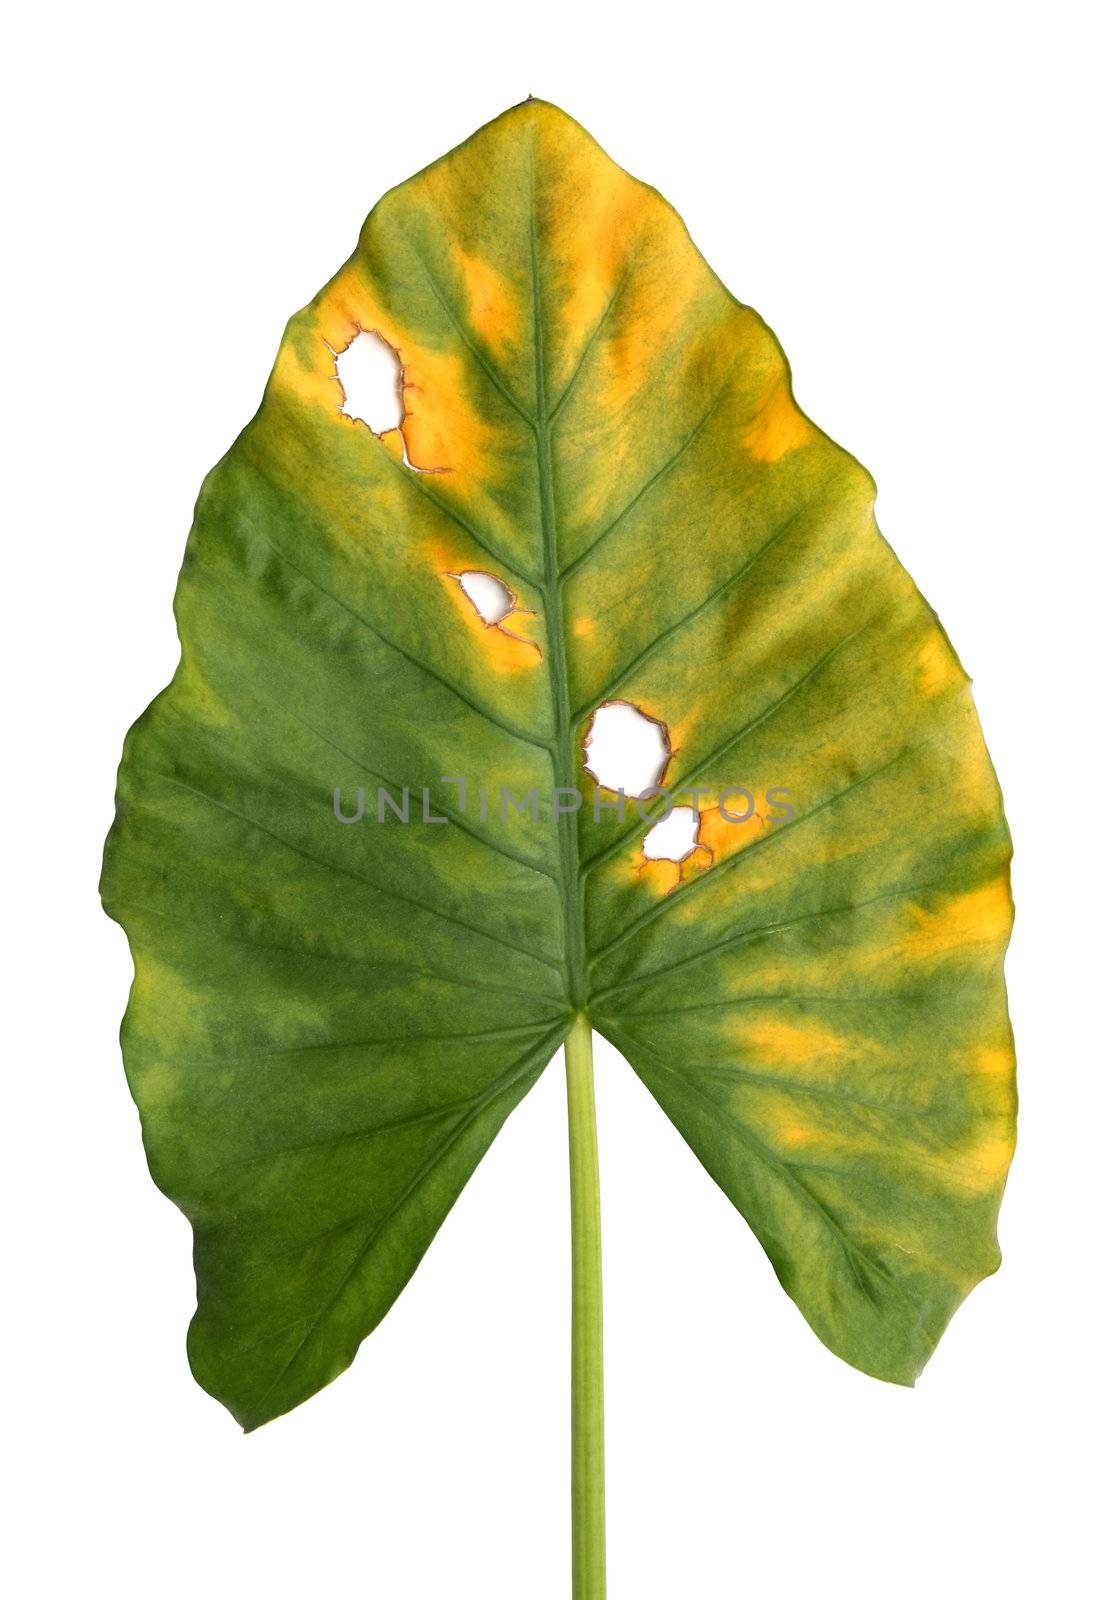 Decomposition of  Giant Taro, Alocasia or Elephant ear green leaf texture isolated on white background 